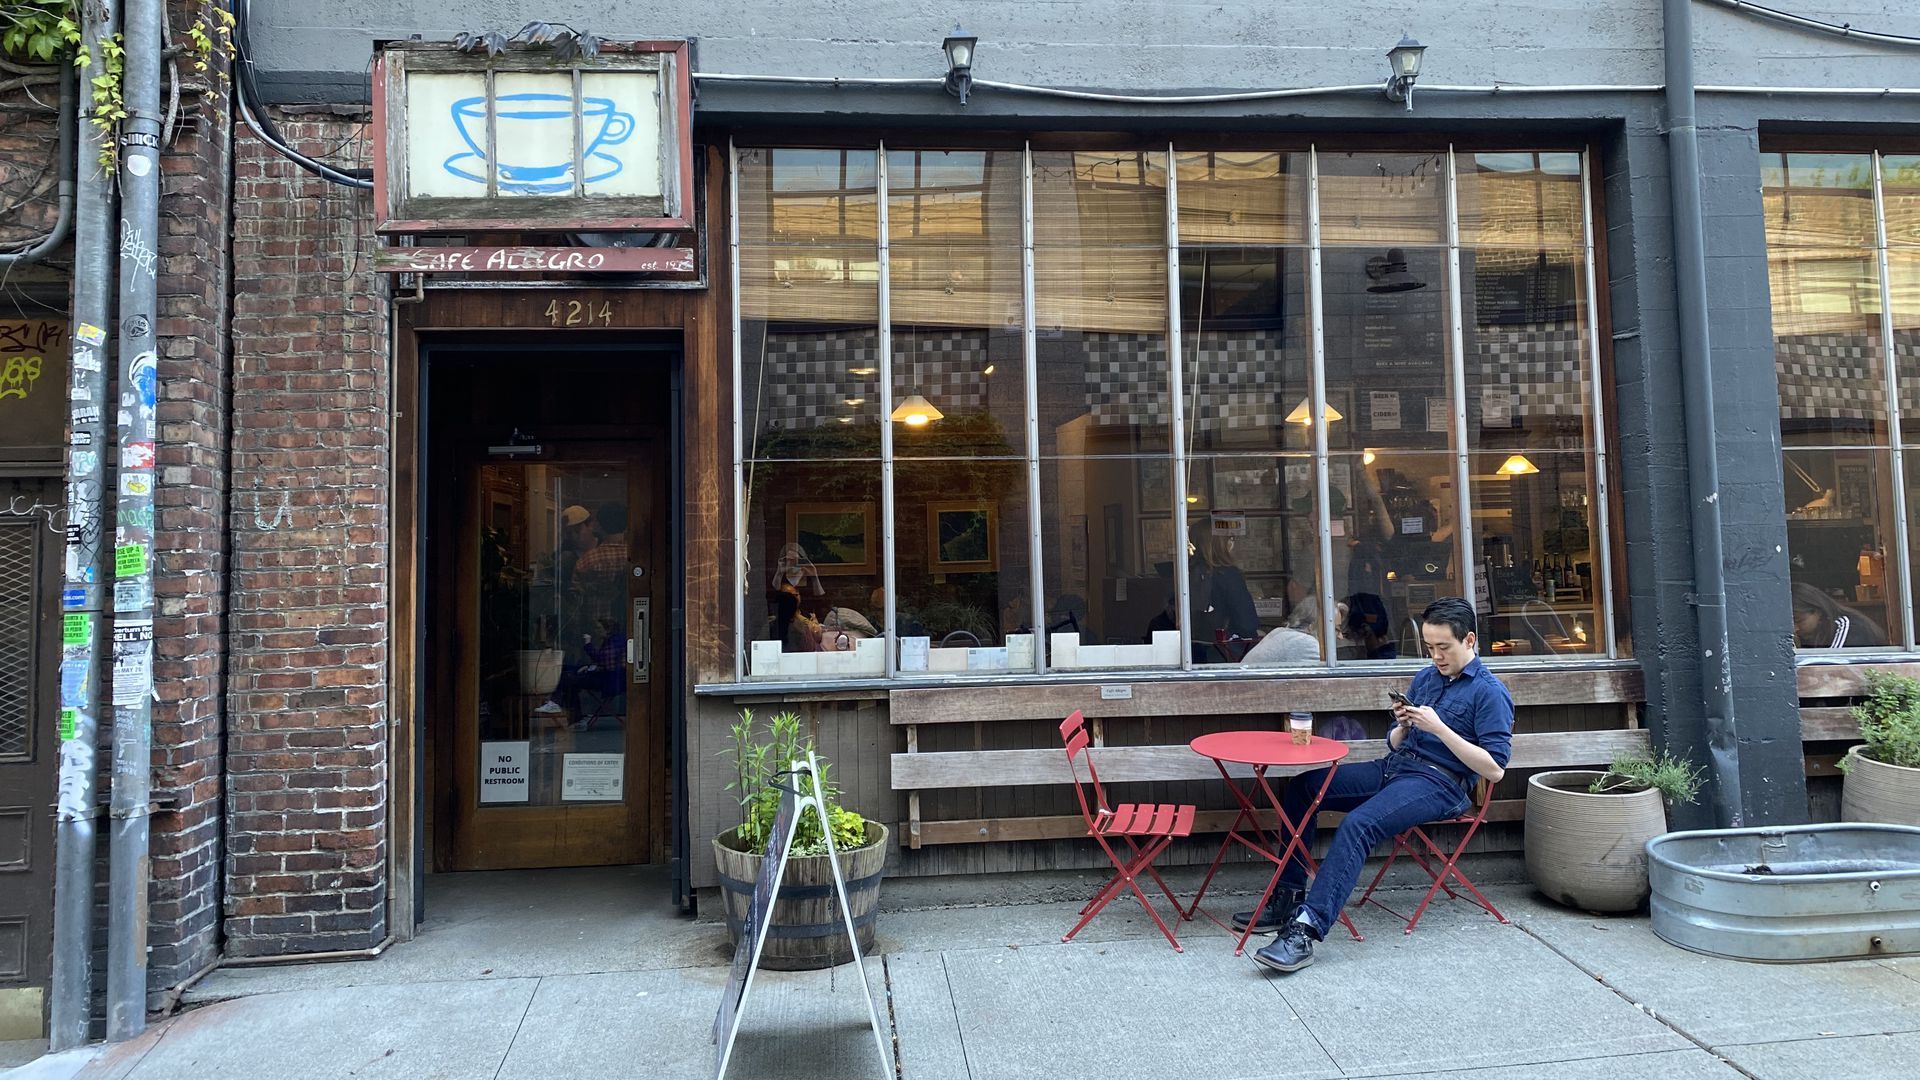 A brick facade with large windows and a hanging sign with a painted coffee mug that says "Cafe Allegro," with a sandwich board out front and a man sitting at a red cafe table. 